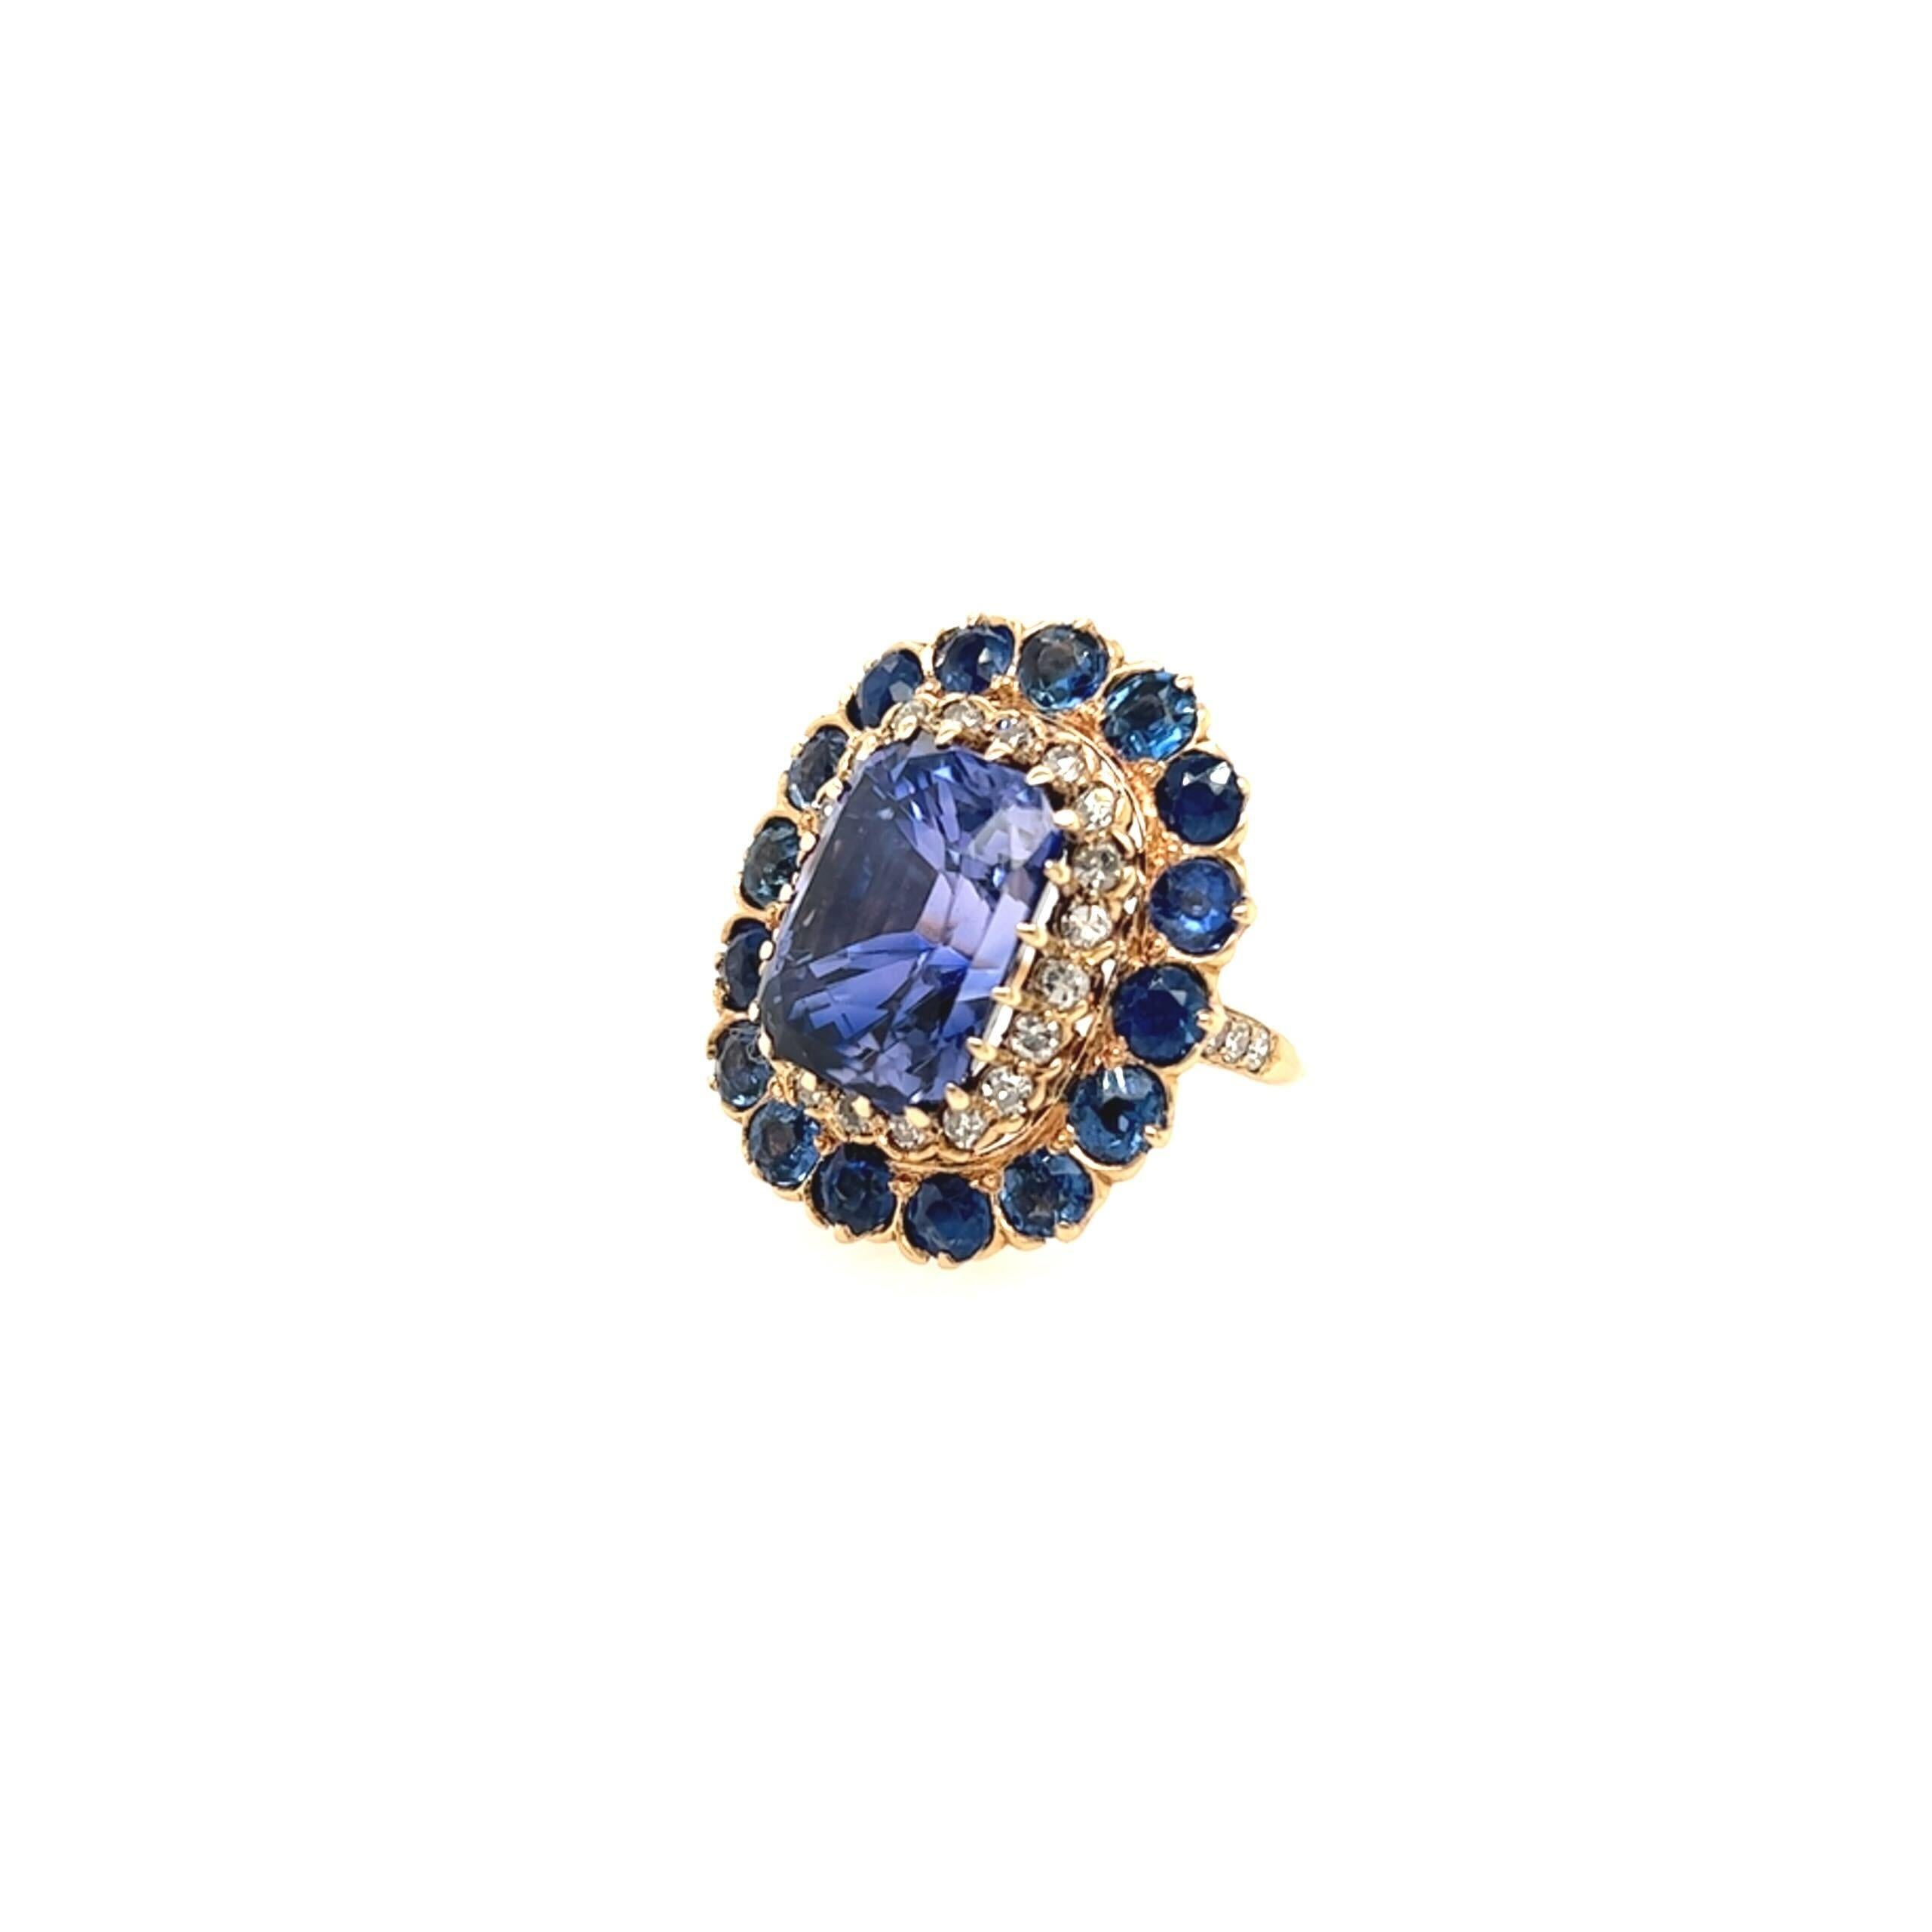 A 14 karat yellow gold, sapphire and diamond ring.  Centering a cushion cut color change blue to violet sapphire, surrounded by a row of twenty (20) brilliant cut diamonds, further surrounded by a row of sixteen (16) round sapphires measuring